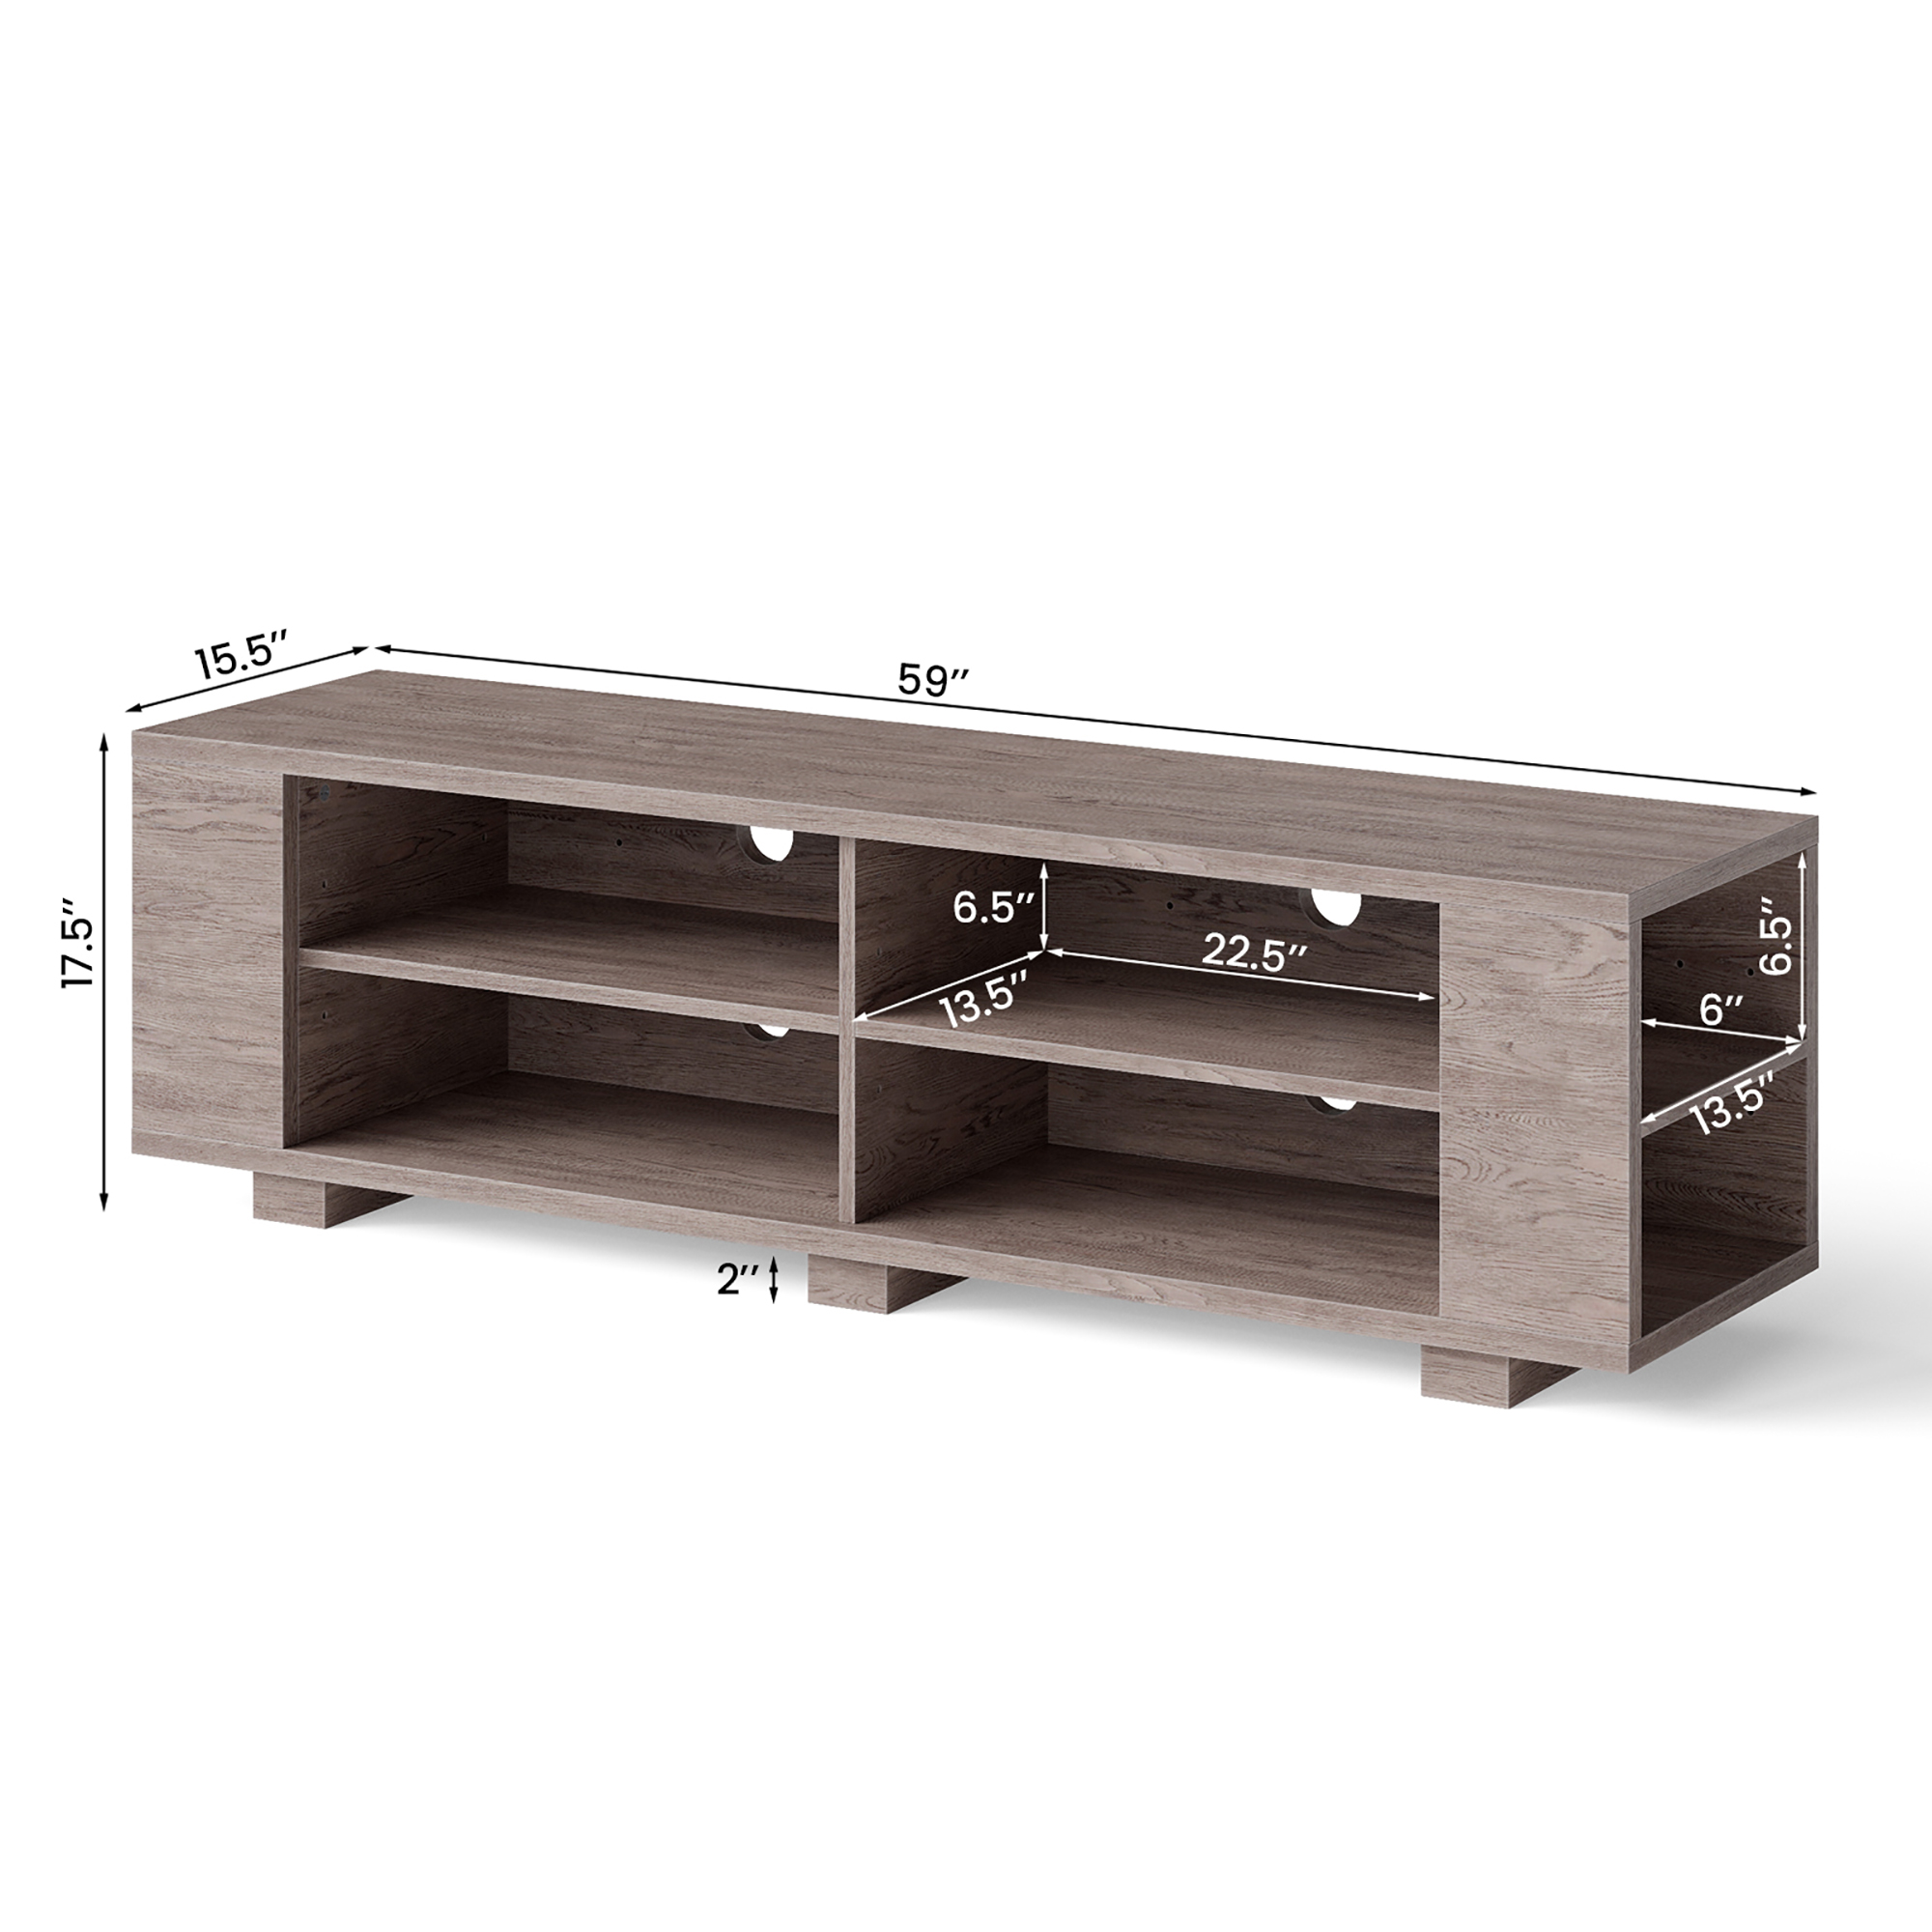 Costway 59'' Wood TV Stand Console Storage Entertainment Media Center with Shelf Grey - image 4 of 9